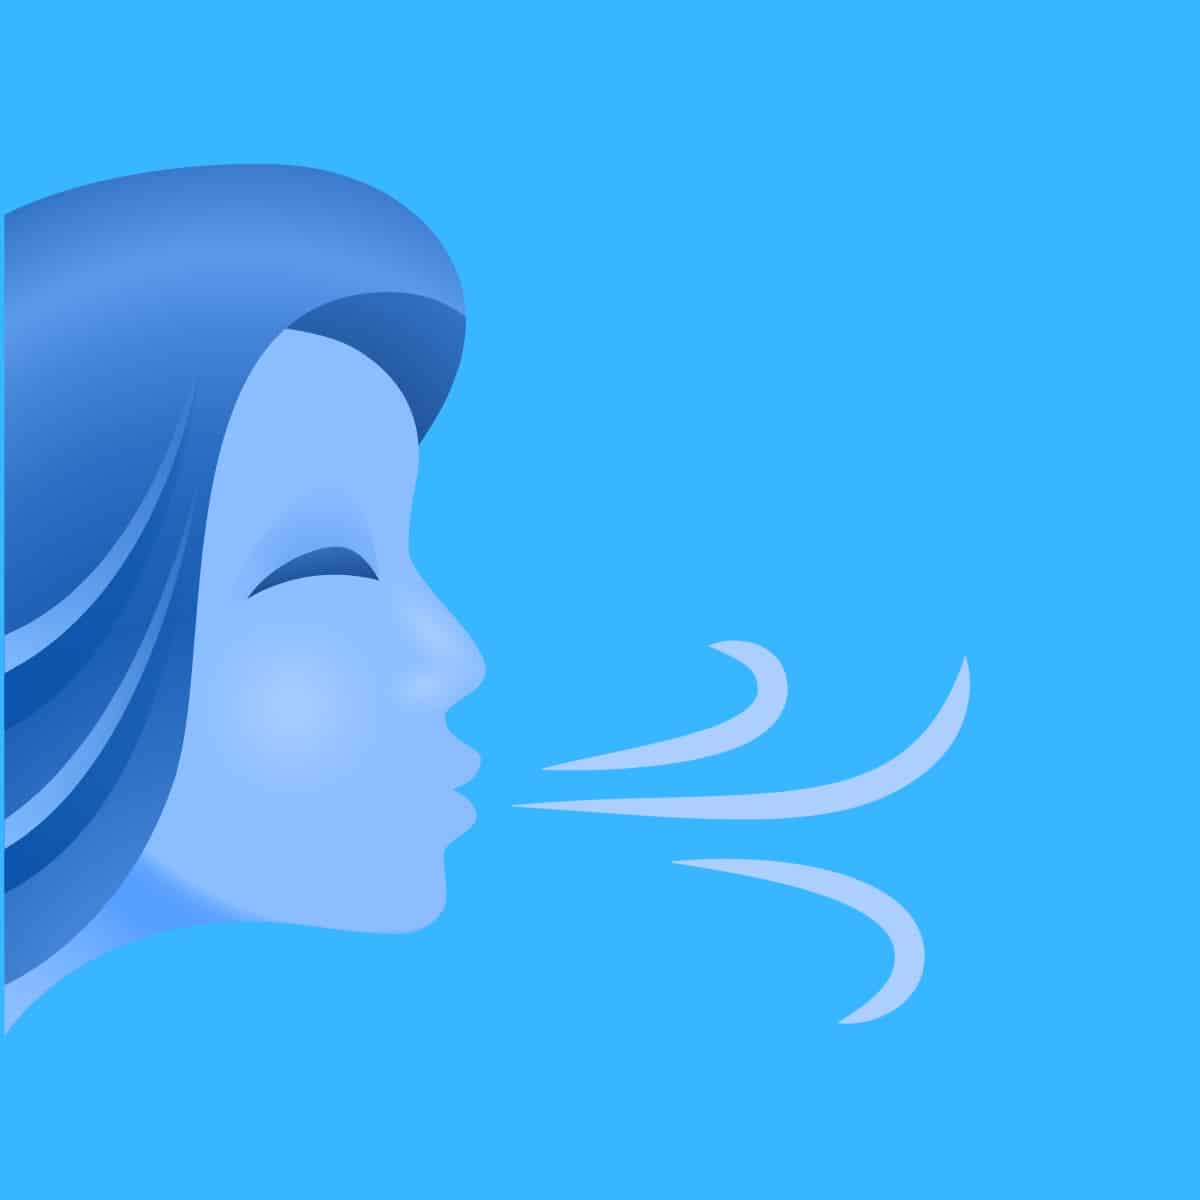 Cartoon graphic of a blue woman blowing as if she is the wind on blue background.